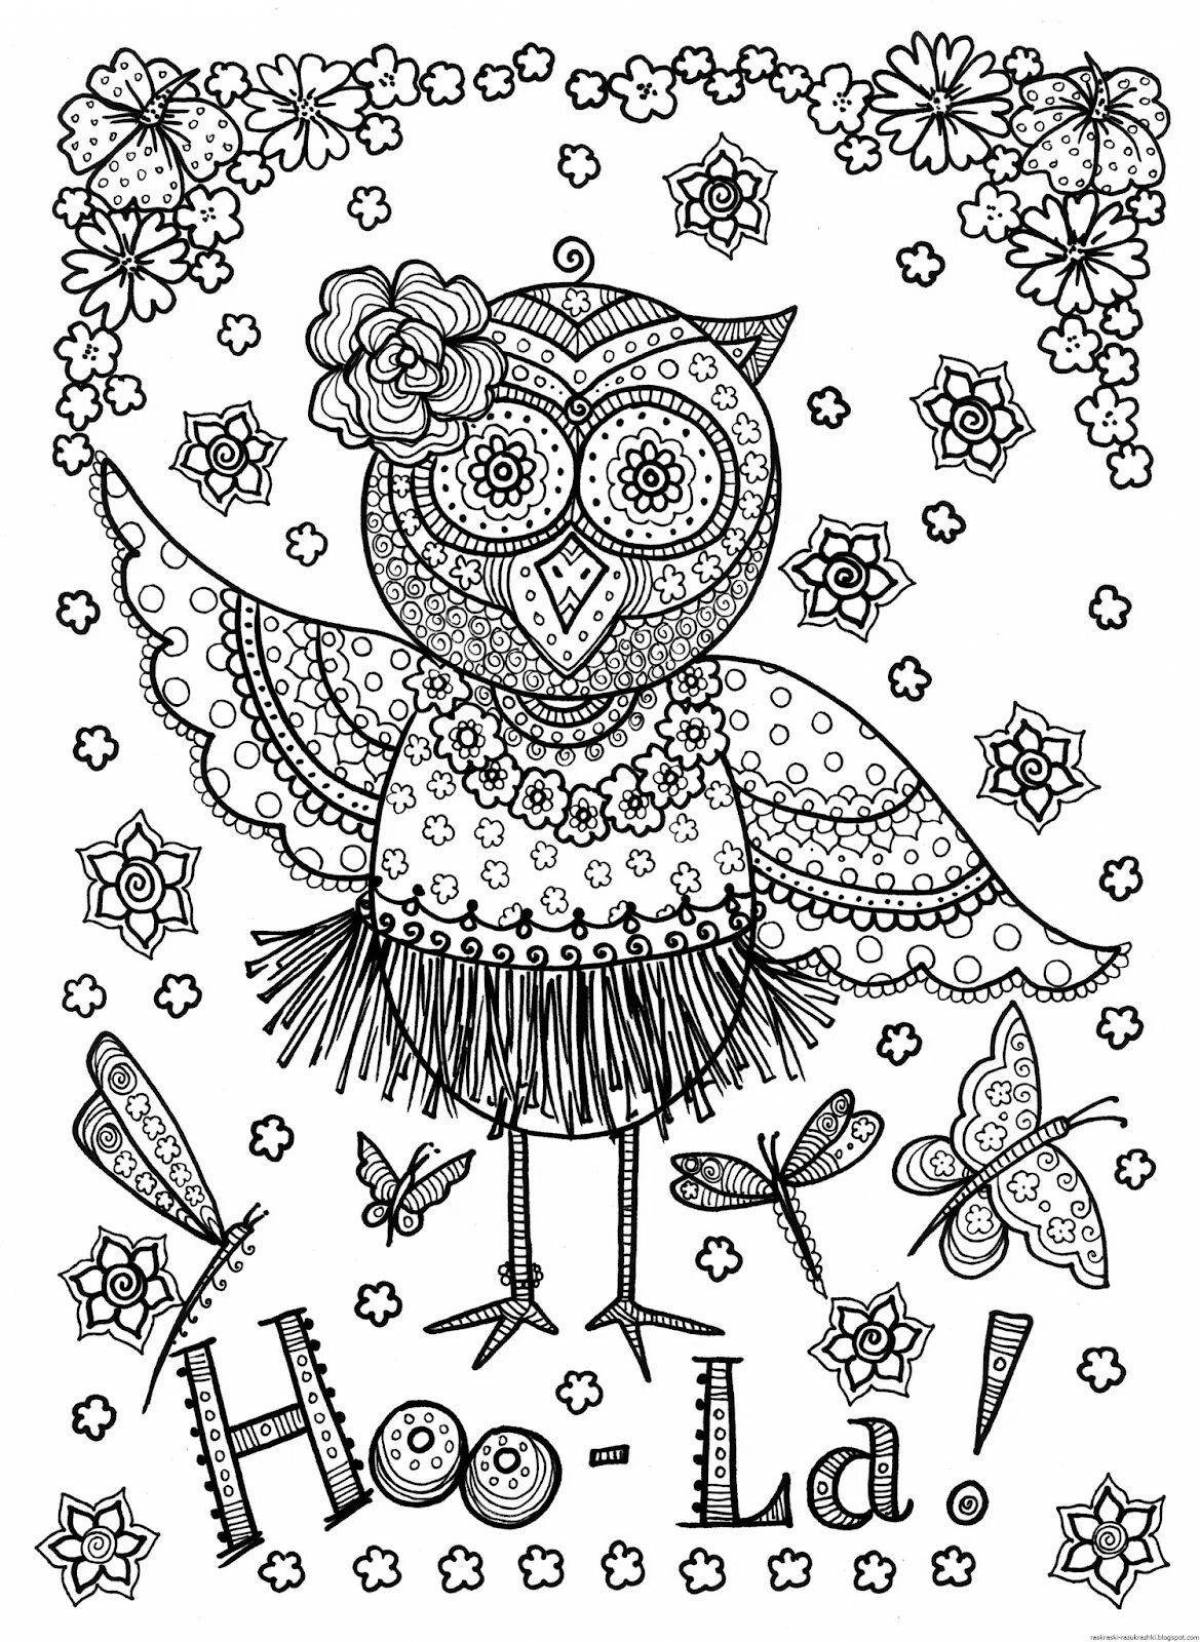 Live coloring owl for girls